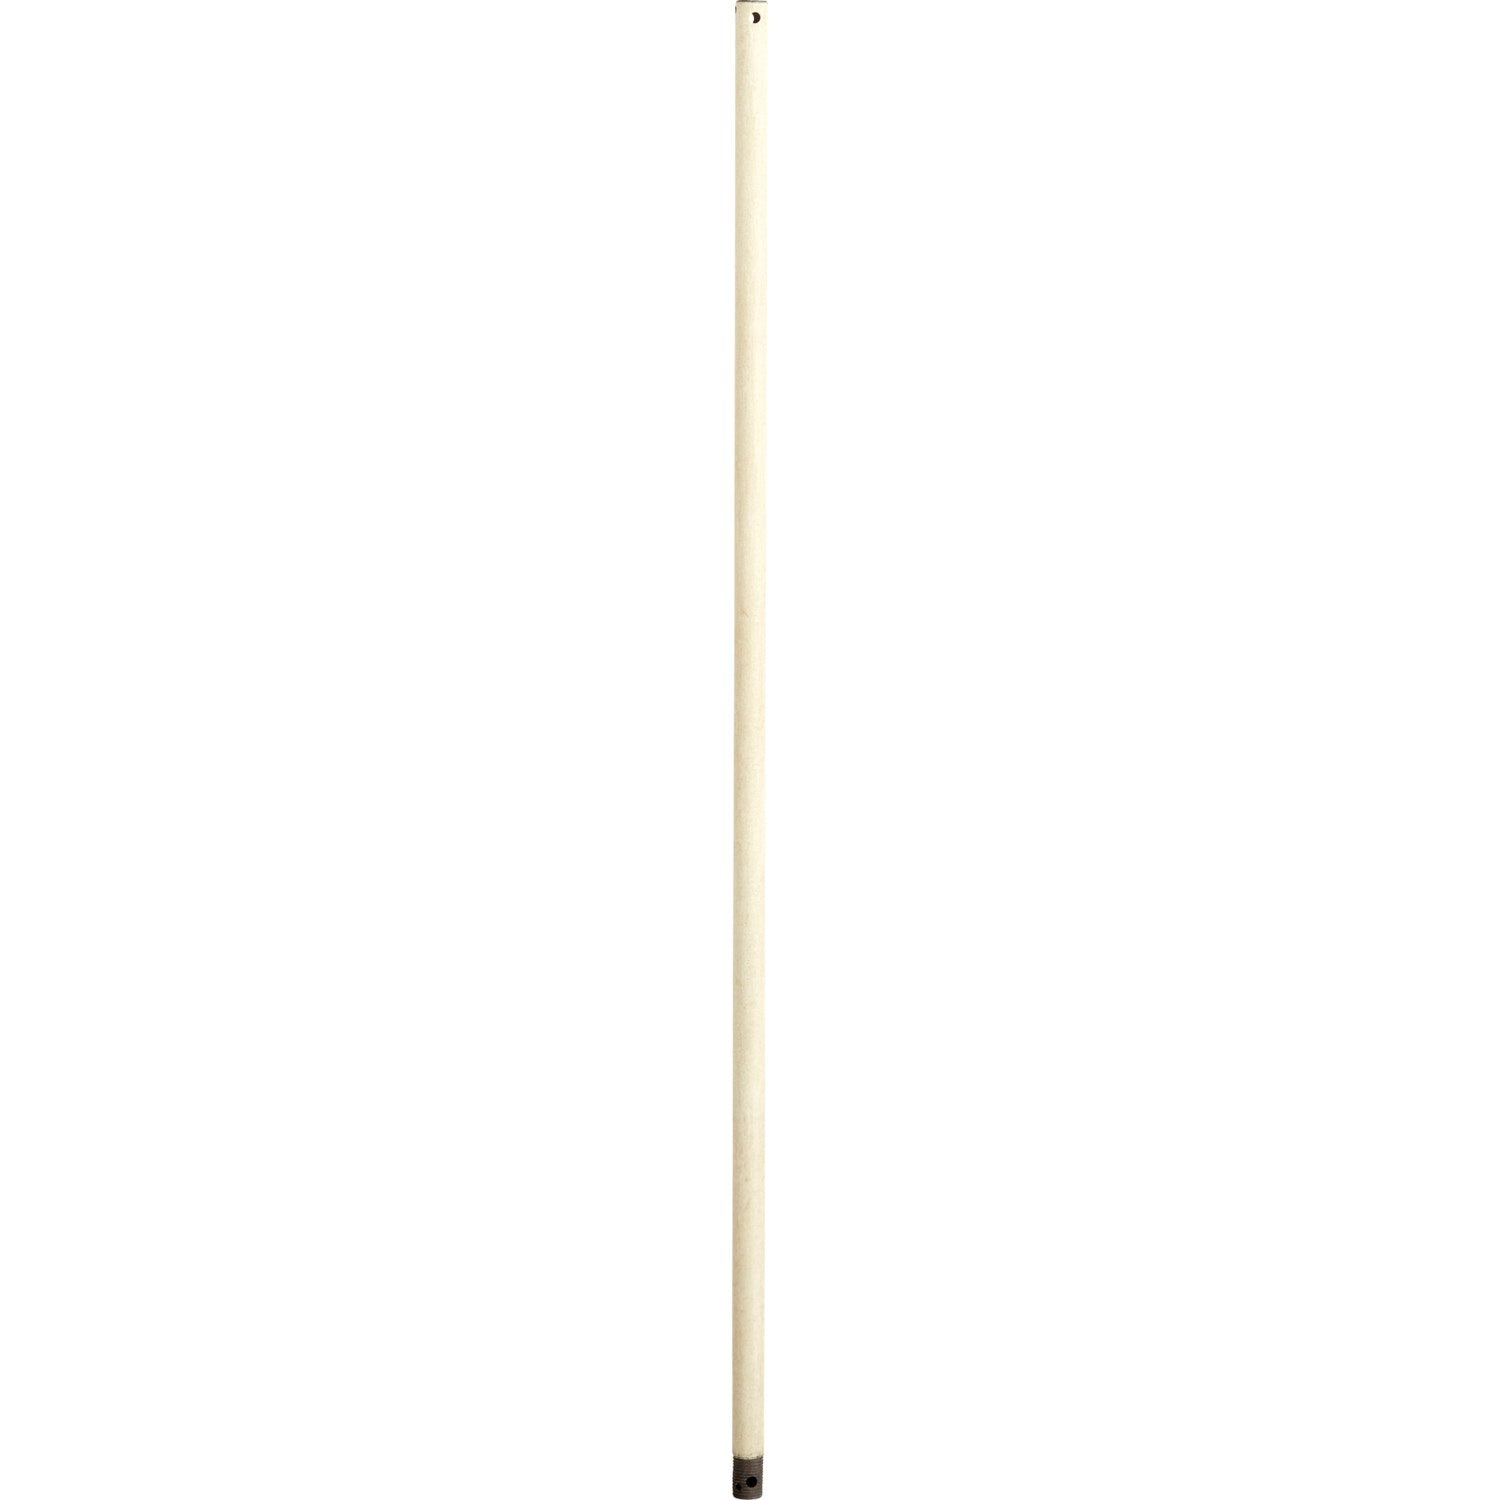 Quorum - 6-3670 - Downrod - 36 in. Downrods - Persian White